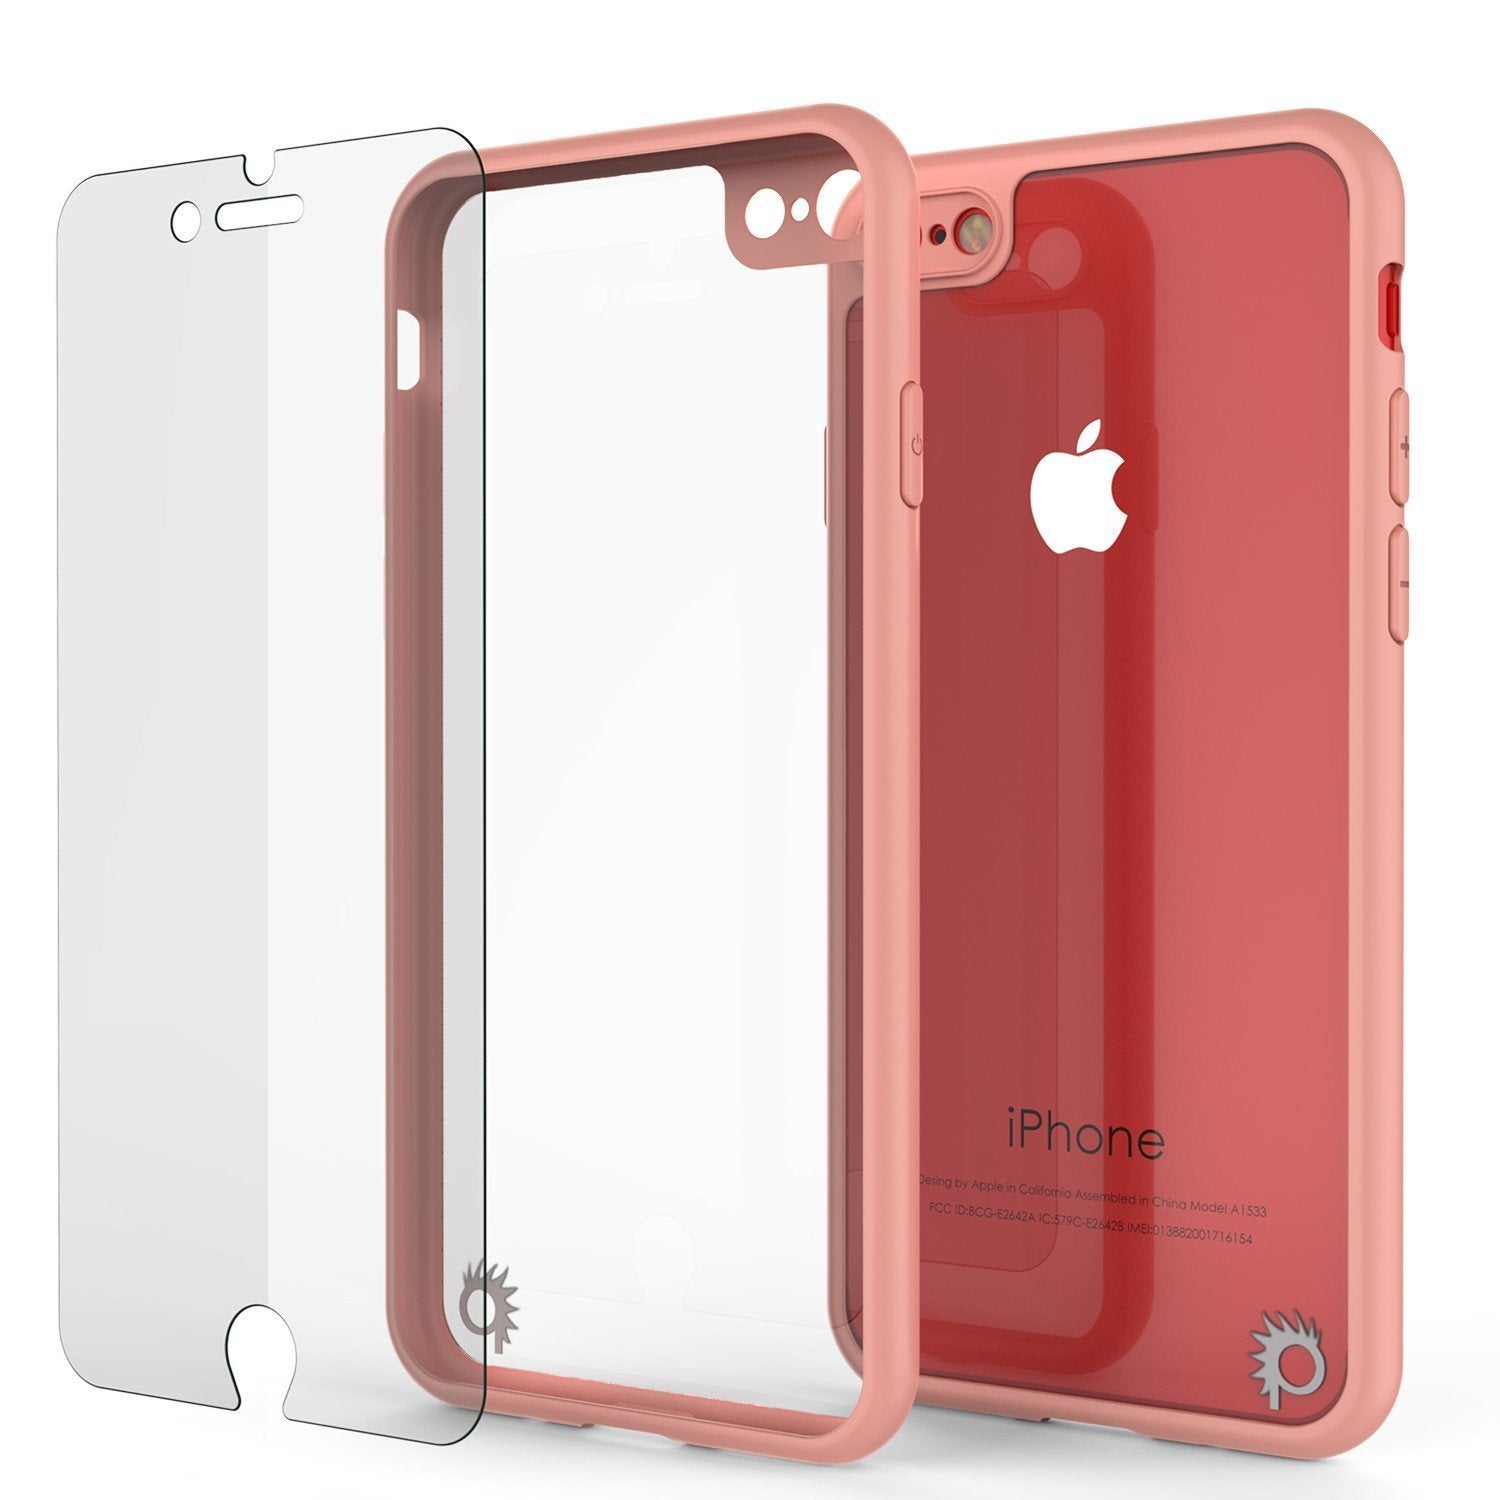 iPhone 8 Case [MASK Series] [PINK] Full Body Hybrid Dual Layer TPU Cover W/ protective Tempered Glass Screen Protector